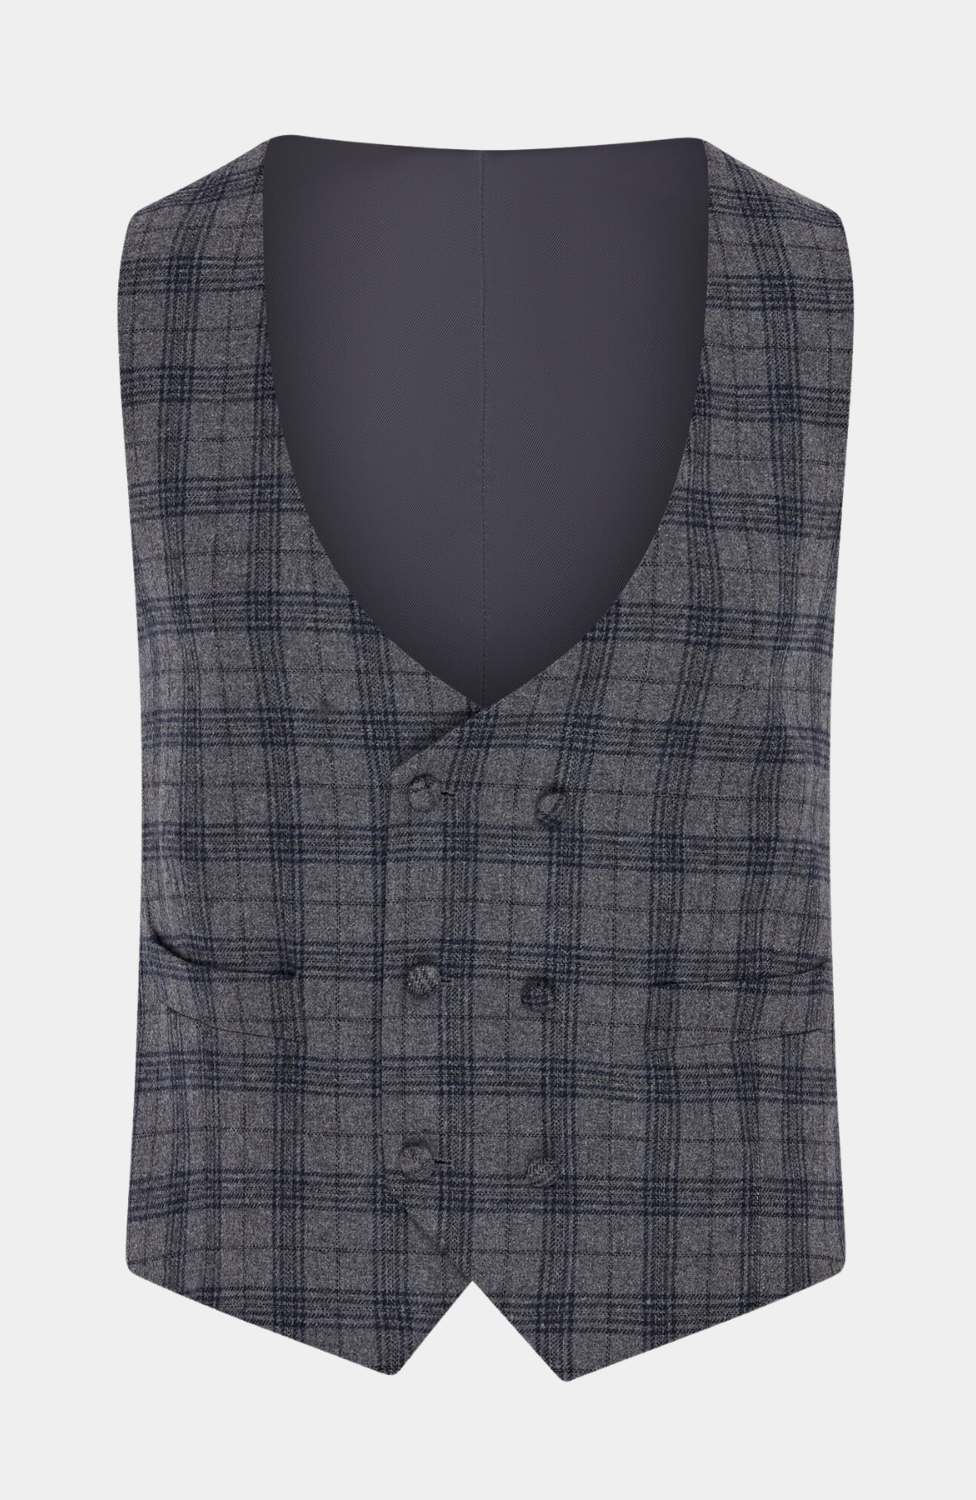 MAIDENS DOUBLE BREASTED WAISTCOAT - HIRE